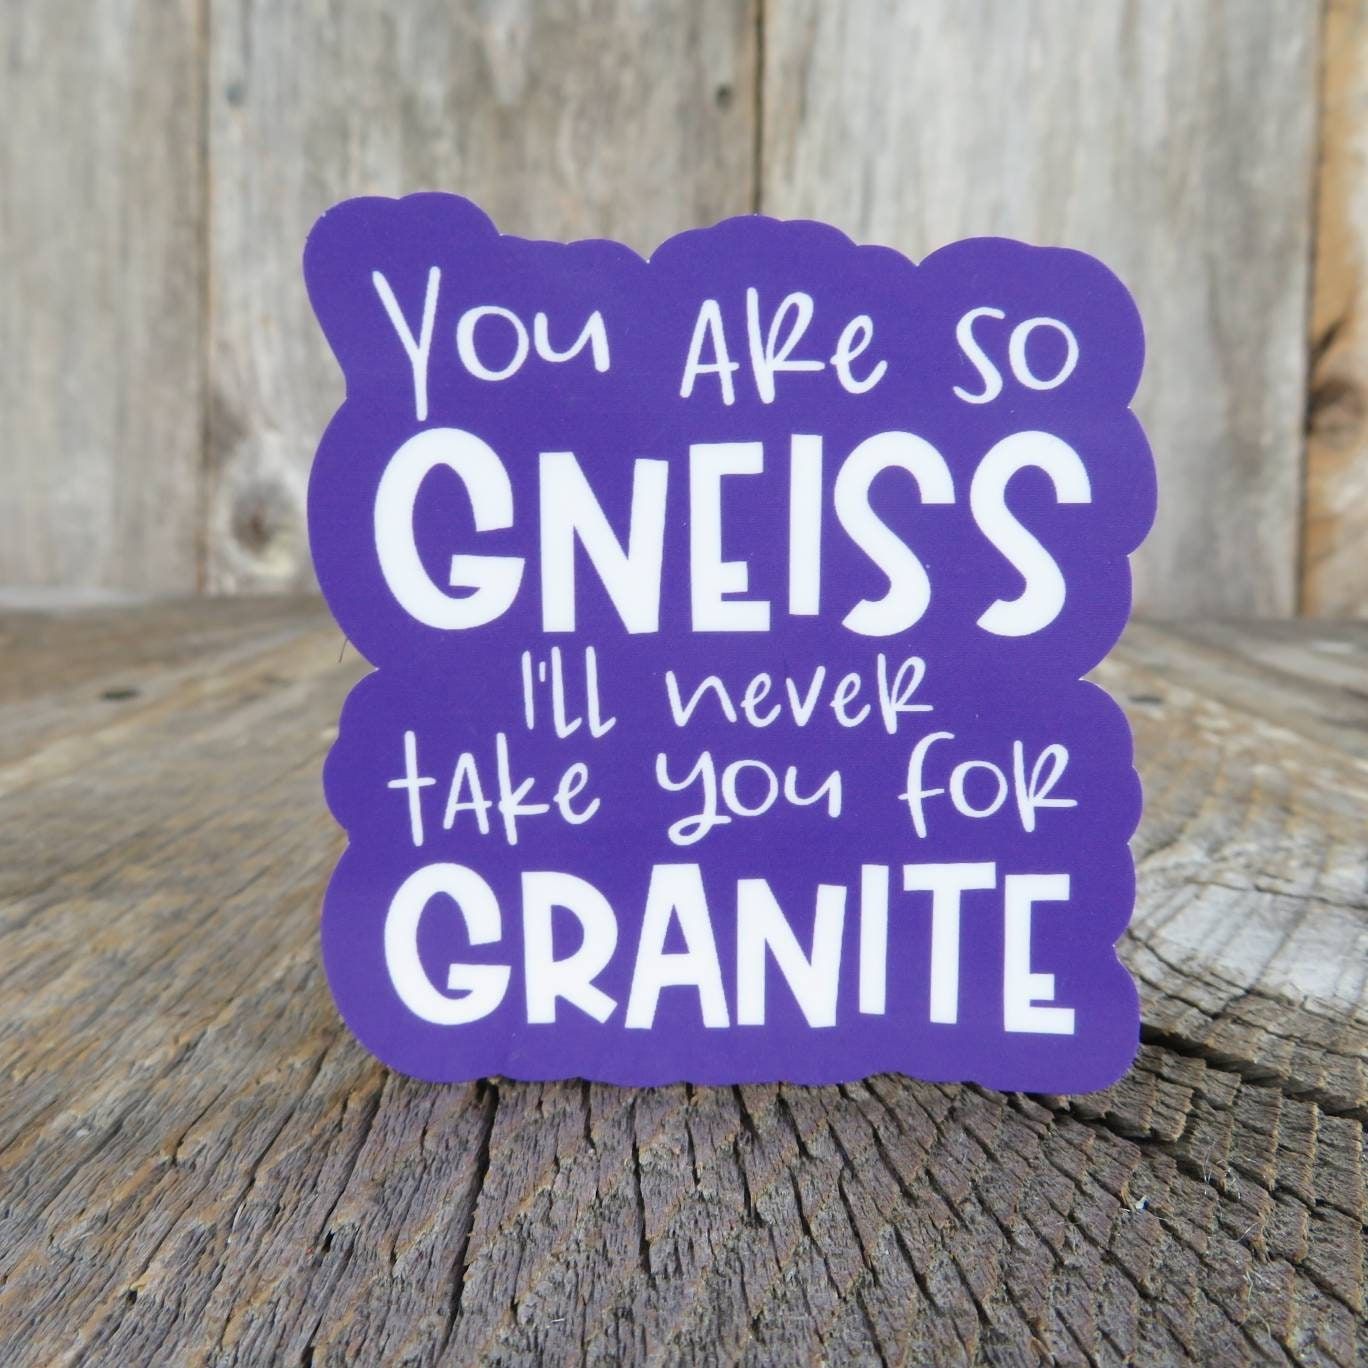 You Are So Gneiss I'll Never Take You For Granite Sticker Water Proof Rock Lover Geologist Humor Funny Dad Joke